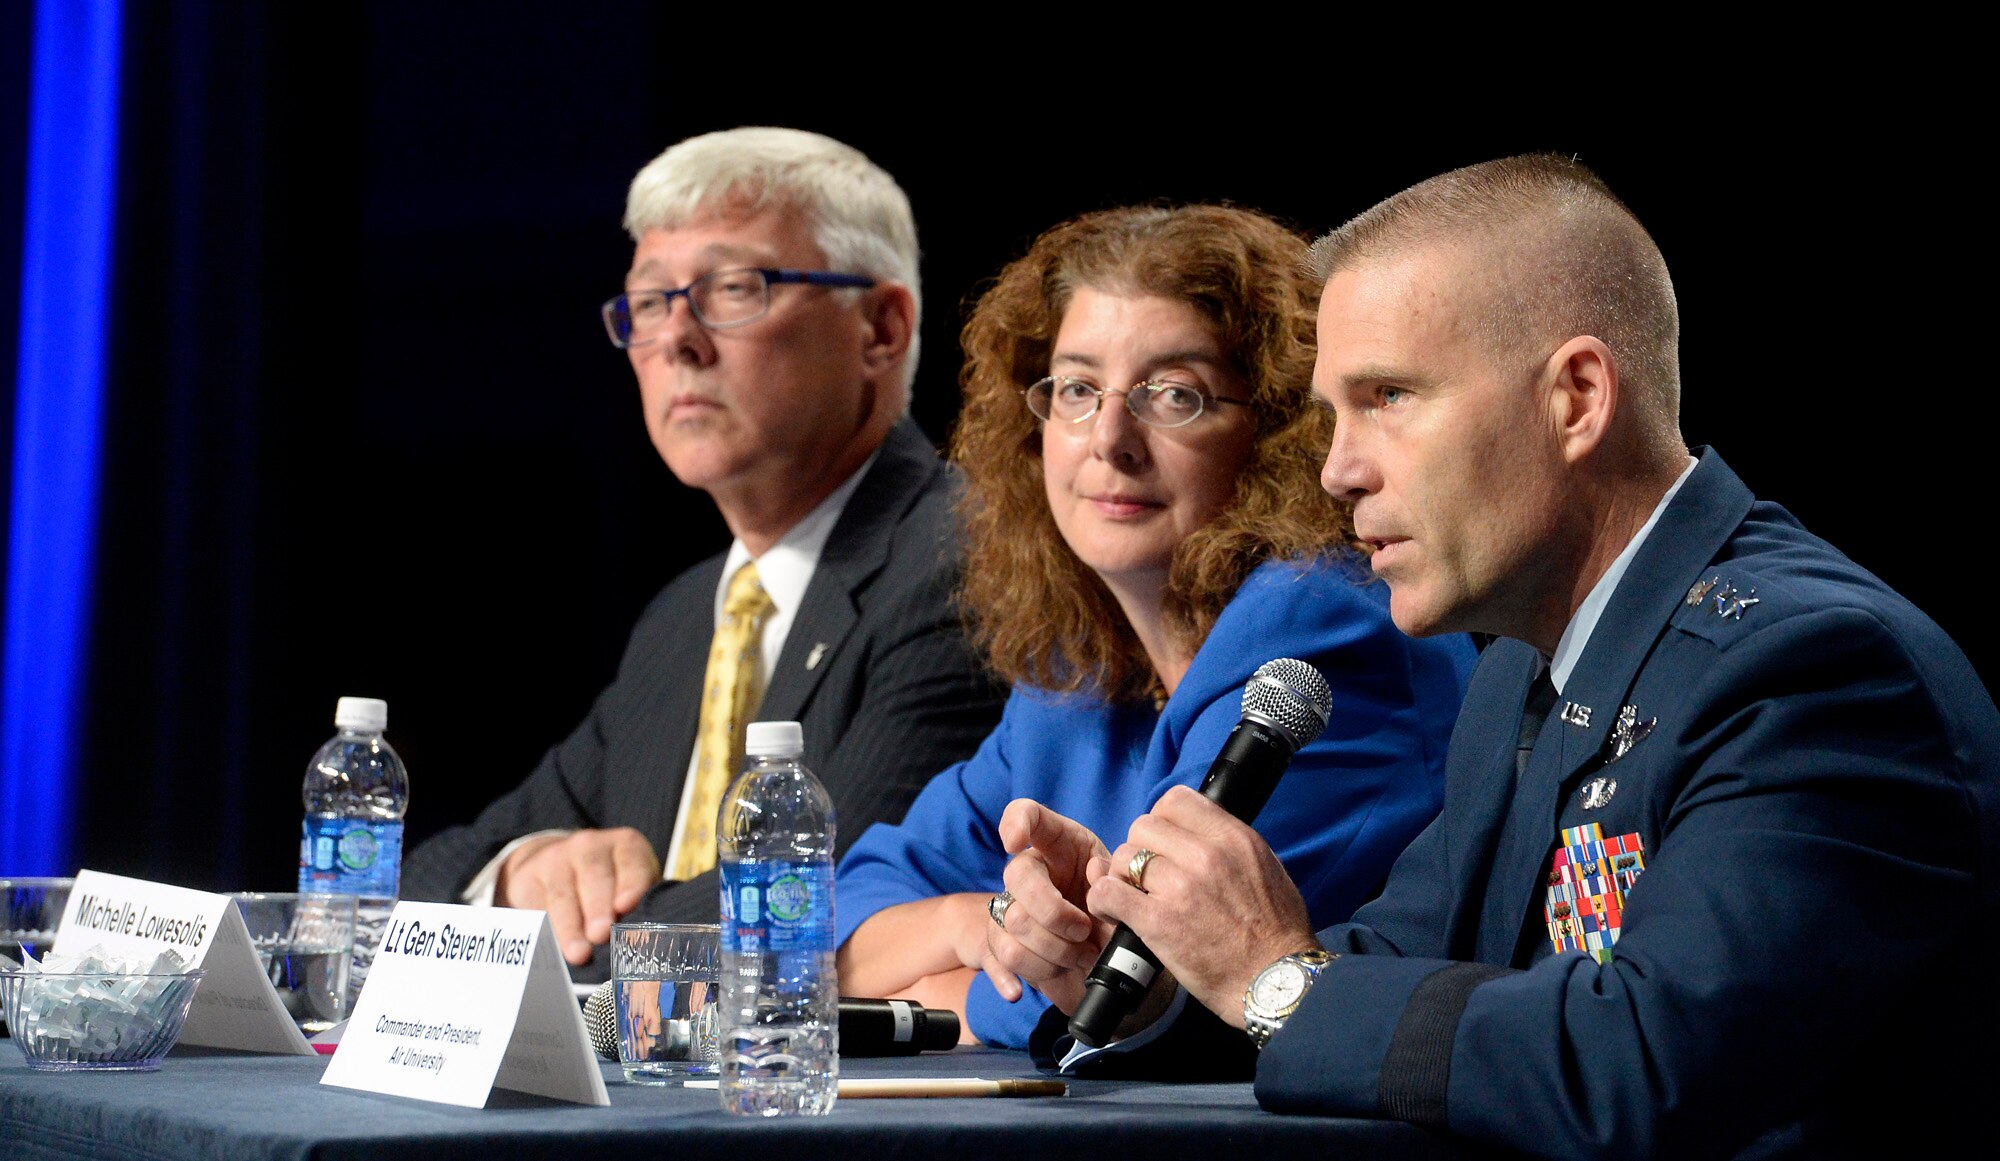 Air University Commander and President Lt. Gen. Steven L. Kwast answers a question with panelists, Principal Deputy Assistant Secretary of the Air Force Daniel R. Sitterly, and Michelle S. LoweSolis, the director of plans and integration, deputy chief of staff for manpower and personnel, Headquarters Air Force, during a discussion about the human capital plan at the Air Force Association Air and Space Conference and Technology Exposition Sept. 15, 2015, in Washington, D.C. The Air Force experts talked about the way-ahead for equipping, training and growing future Airmen. (U.S. Air Force photo/Scott M. Ash)